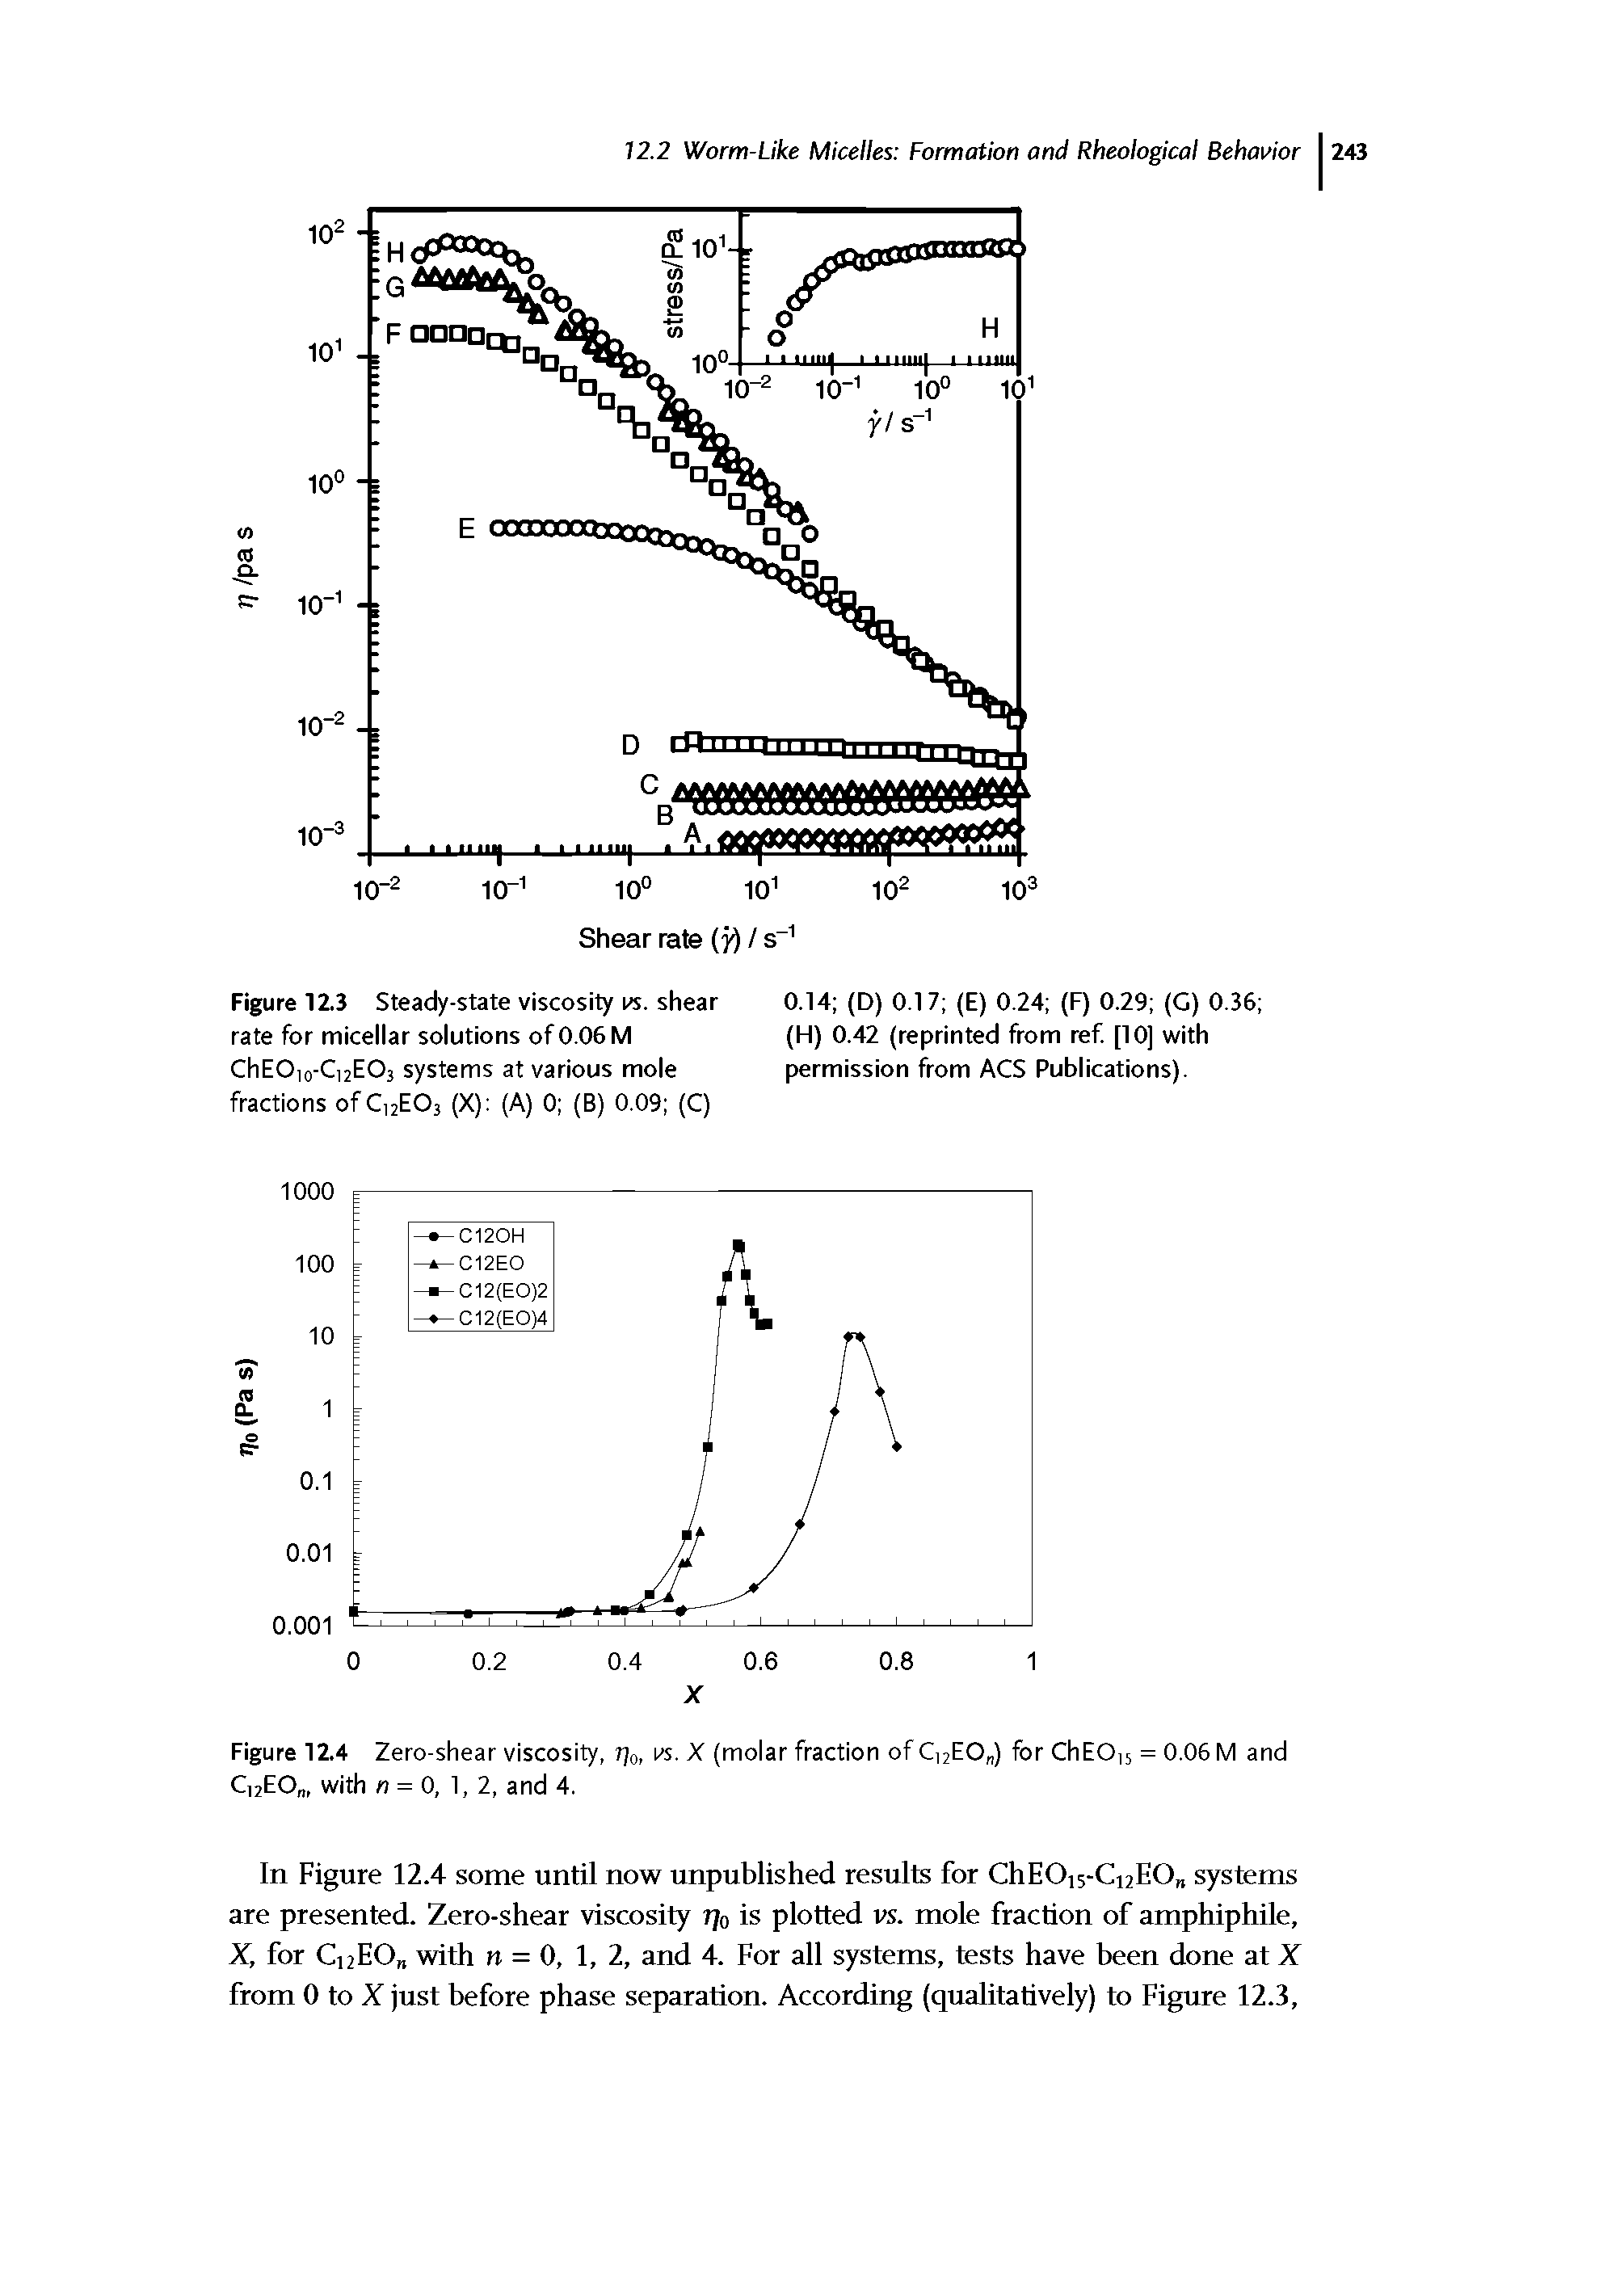 Figure 12.3 Steady-state viscosity vs. shear rate for micellar solutions of 0.06 M ChEOio-Ci2E03 systems at various mole fractions of CizEOj (X) (A) 0 (B) 0.09 (C)...